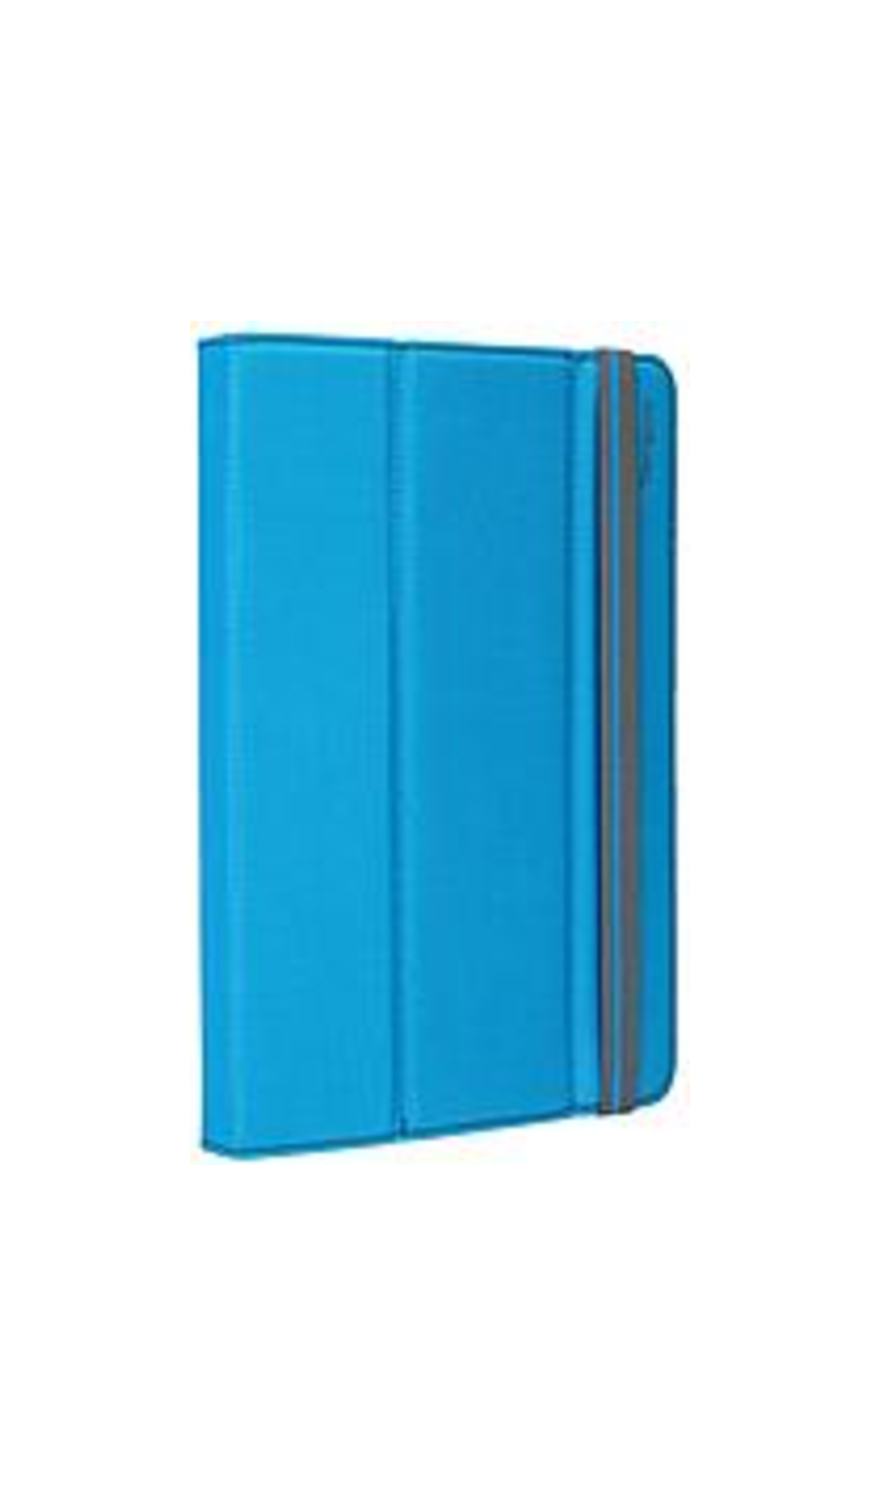 Targus THZ58901US Fit-N-Grip Universal Case for 7 to 8-inch Standard Tablet - Blue